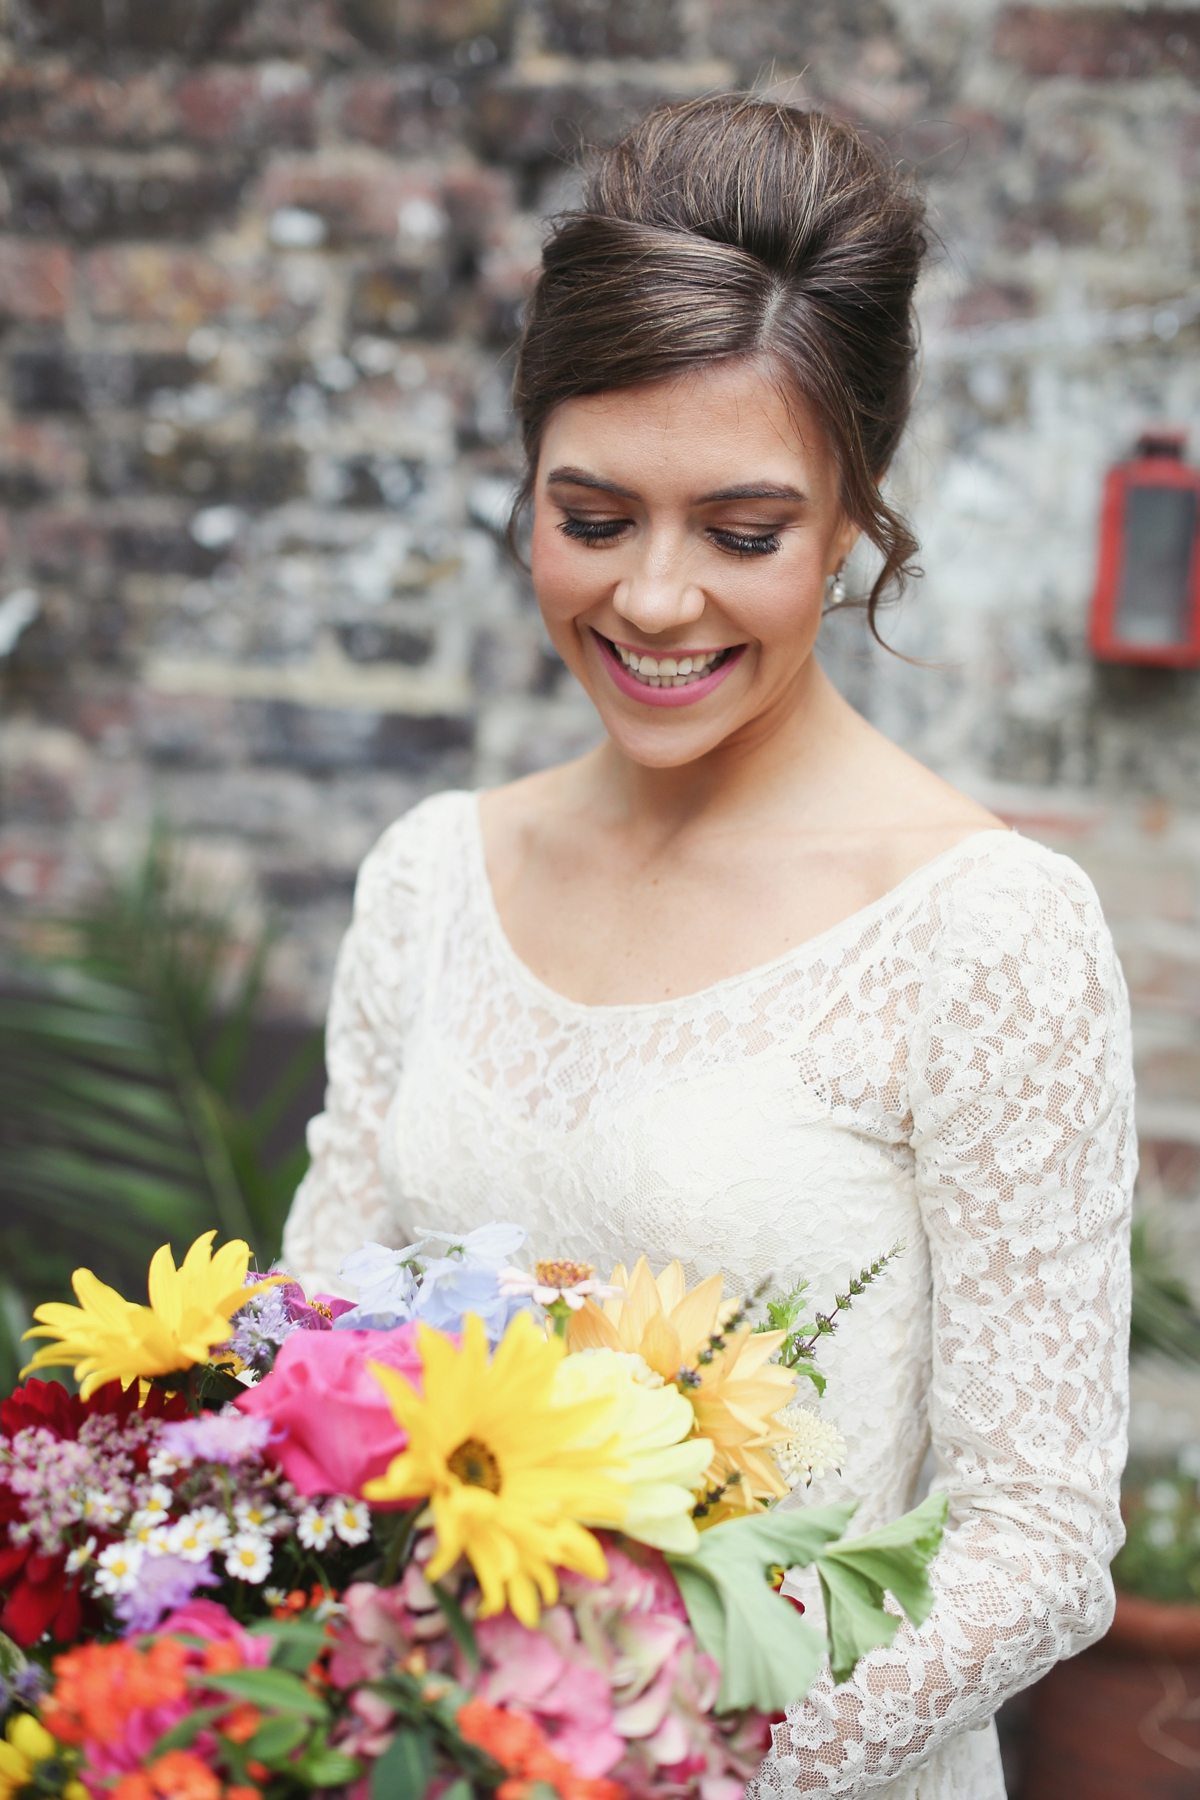 10 A vintage dress and colourful London wedding